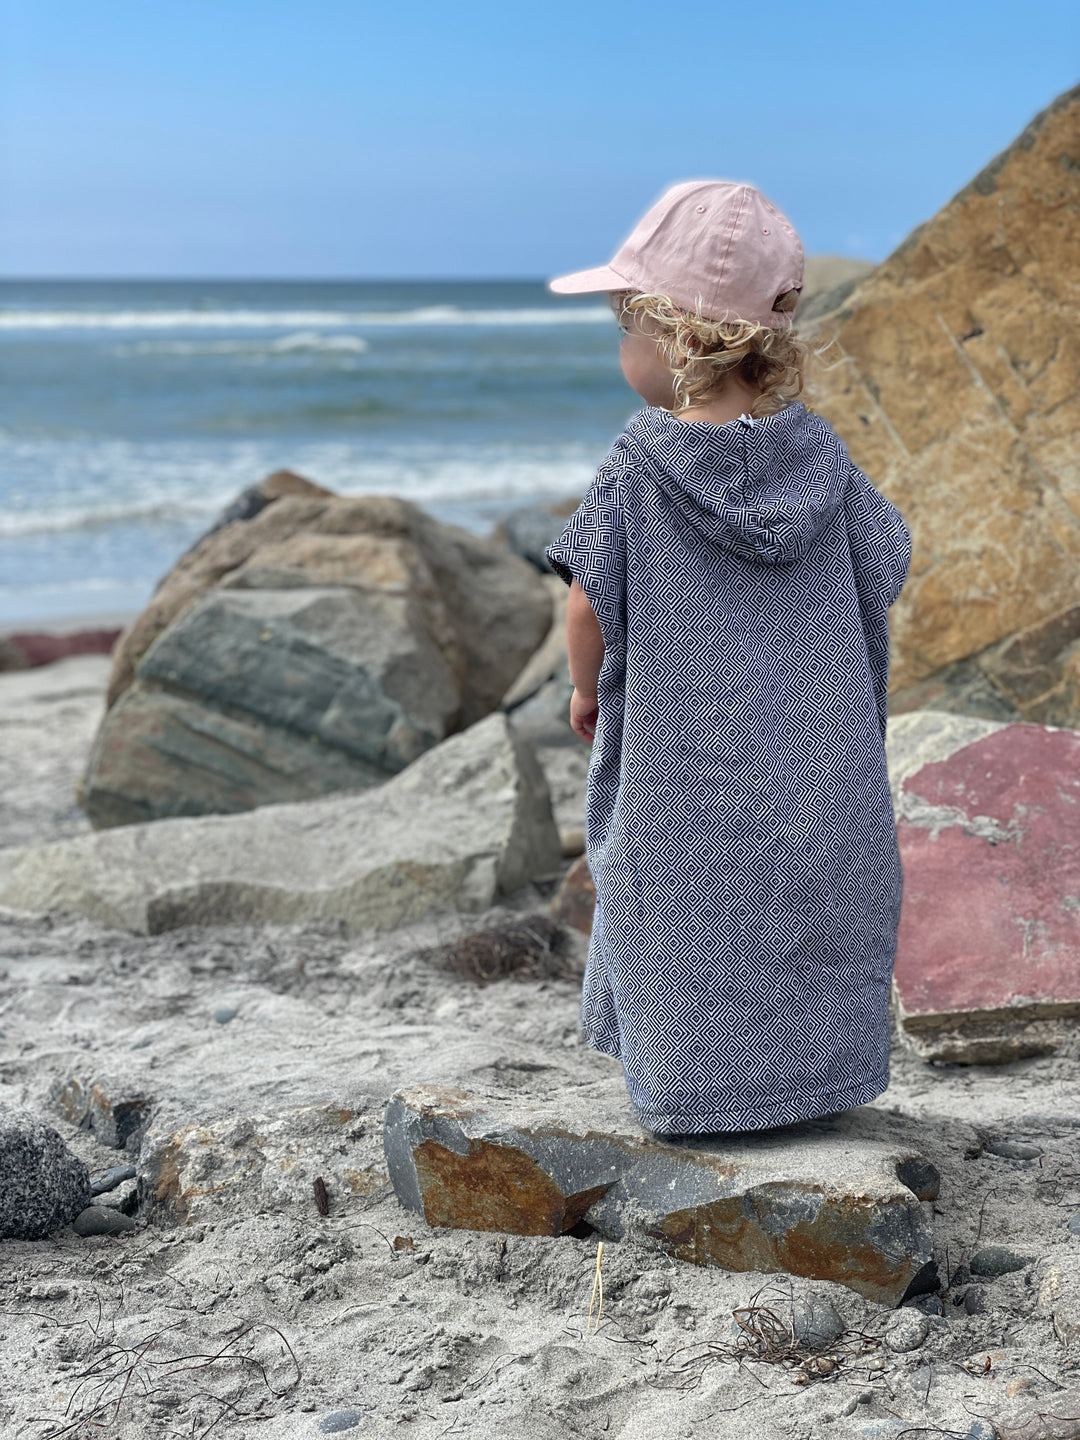 Kids Surf Poncho with Zipper - Towel with Hood for Youth / Children / Toddlers